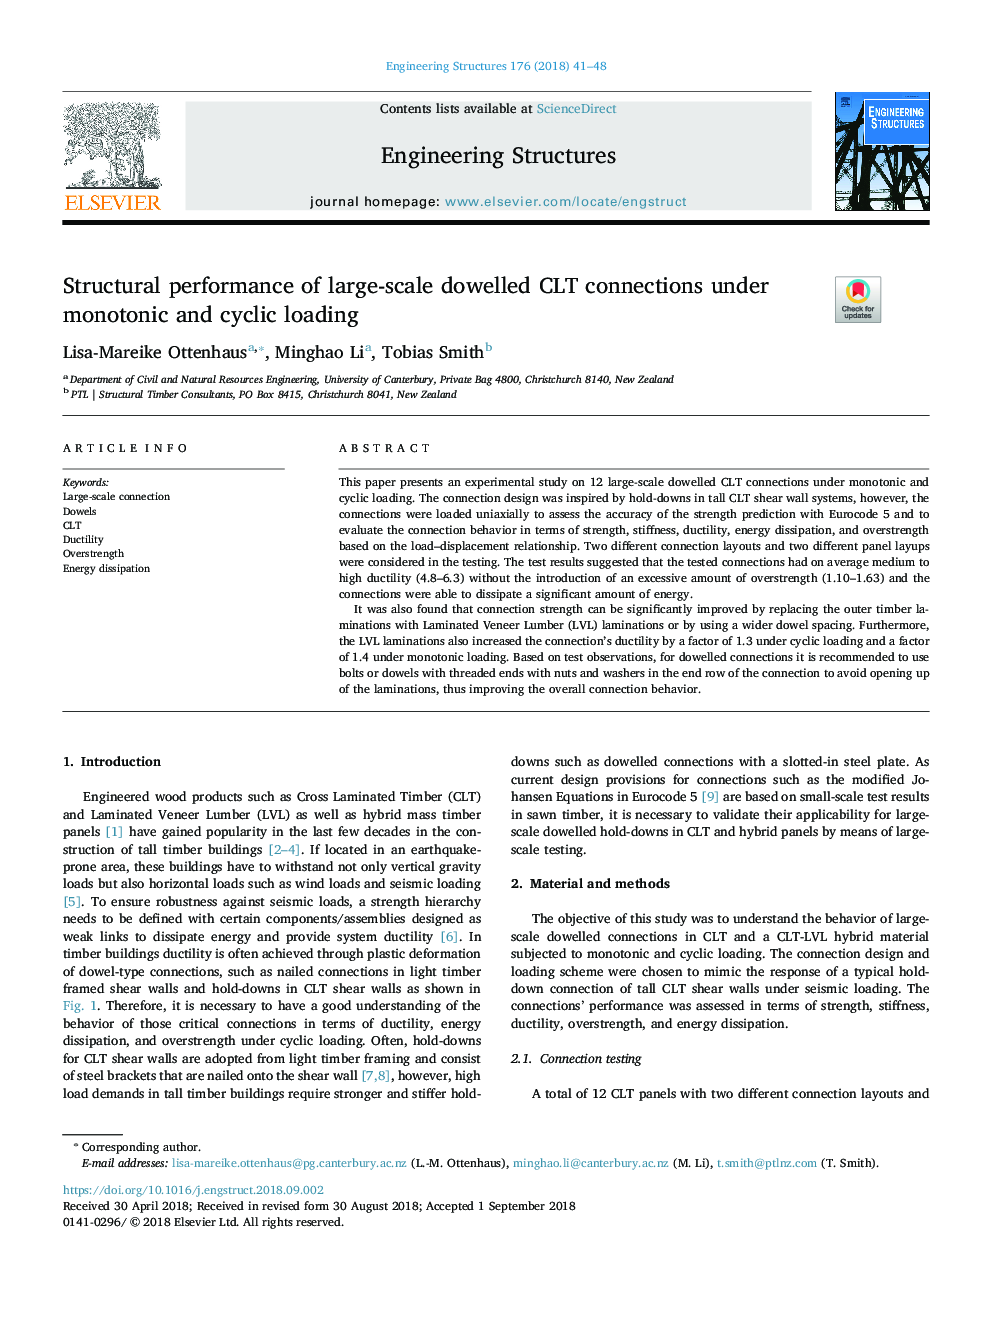 Structural performance of large-scale dowelled CLT connections under monotonic and cyclic loading